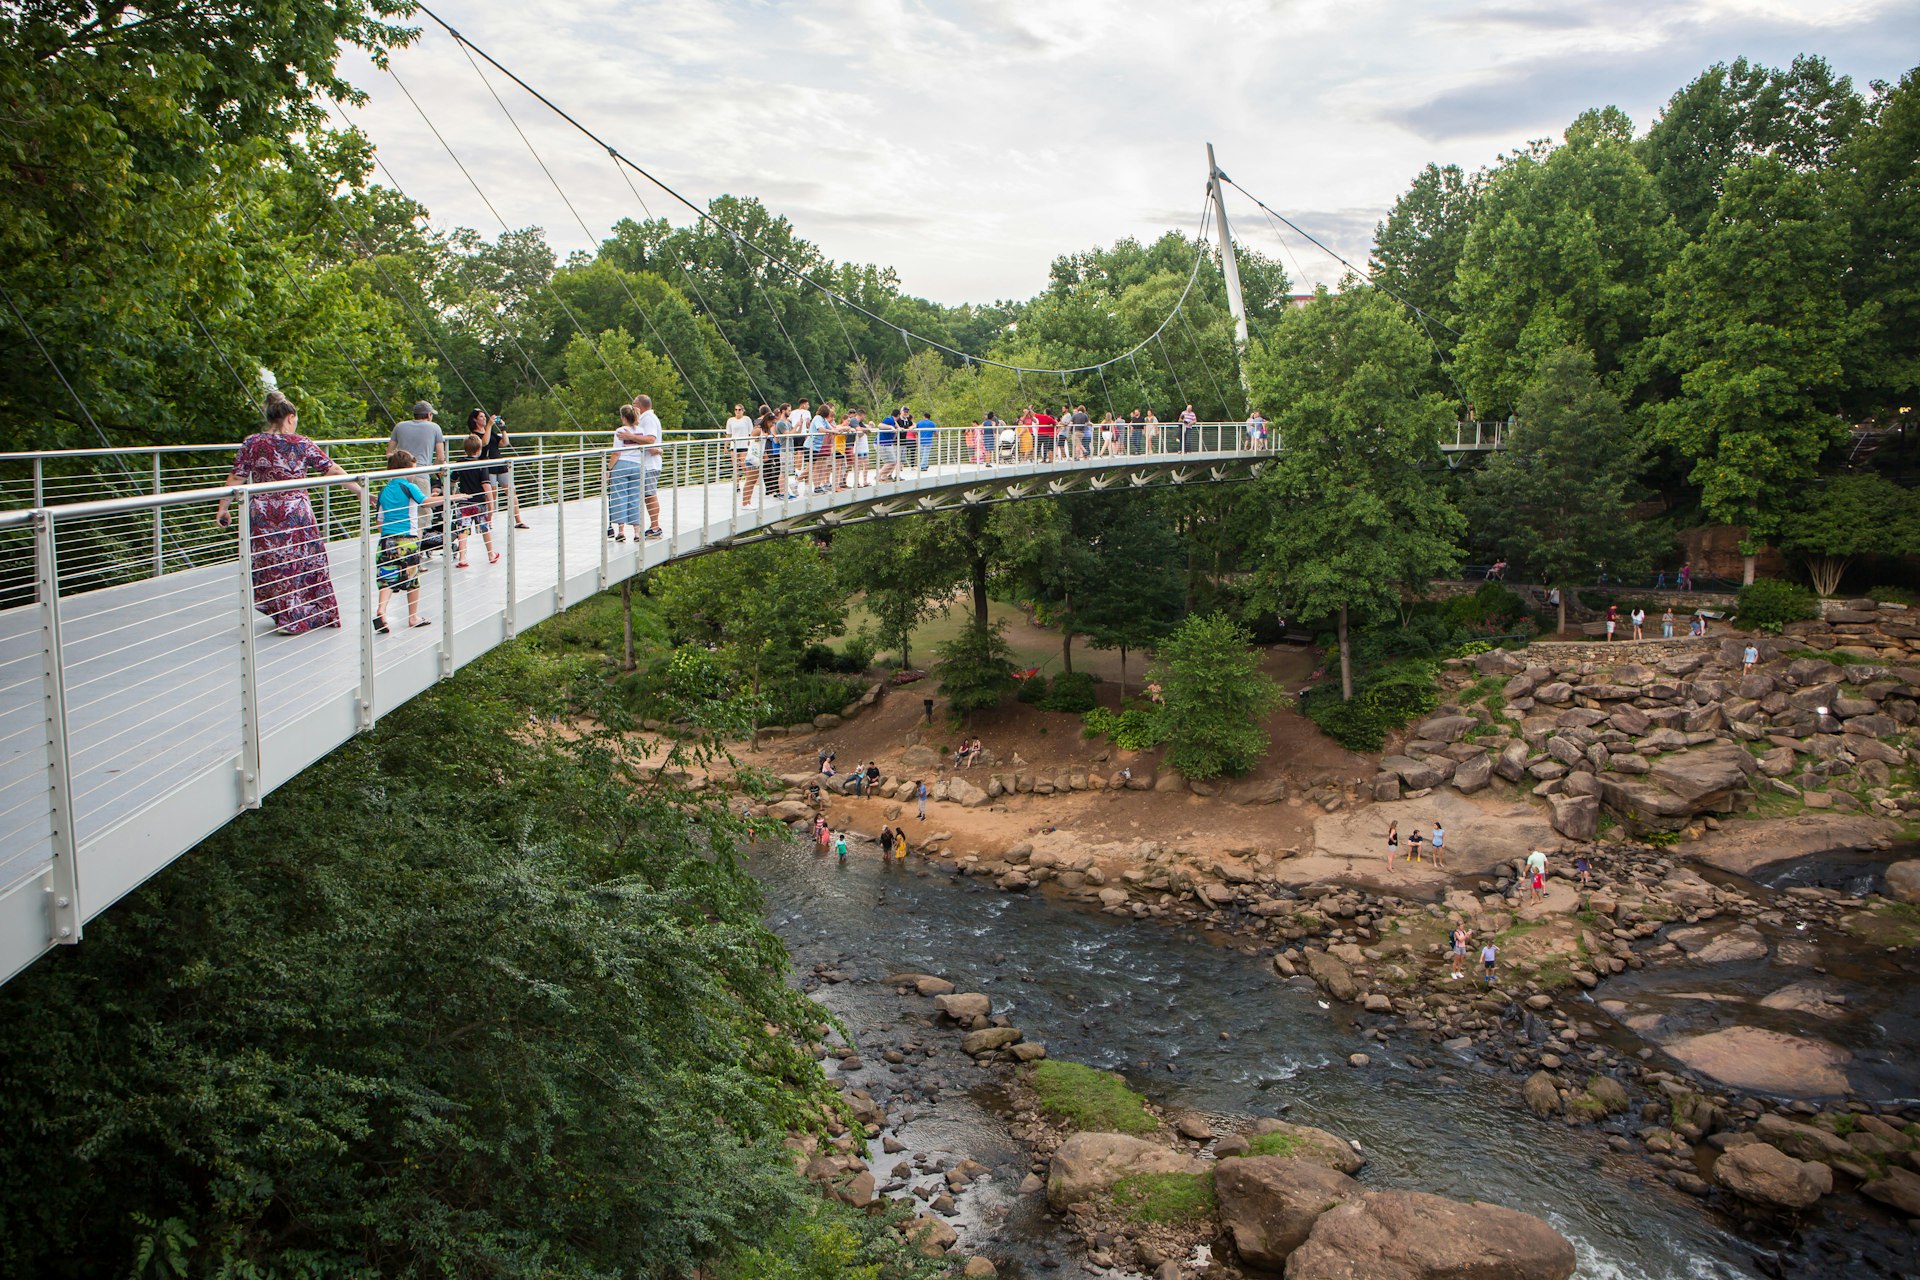 Visitors to Falls Park linger on Liberty Bridge overlooking the Reedy River waterfalls.